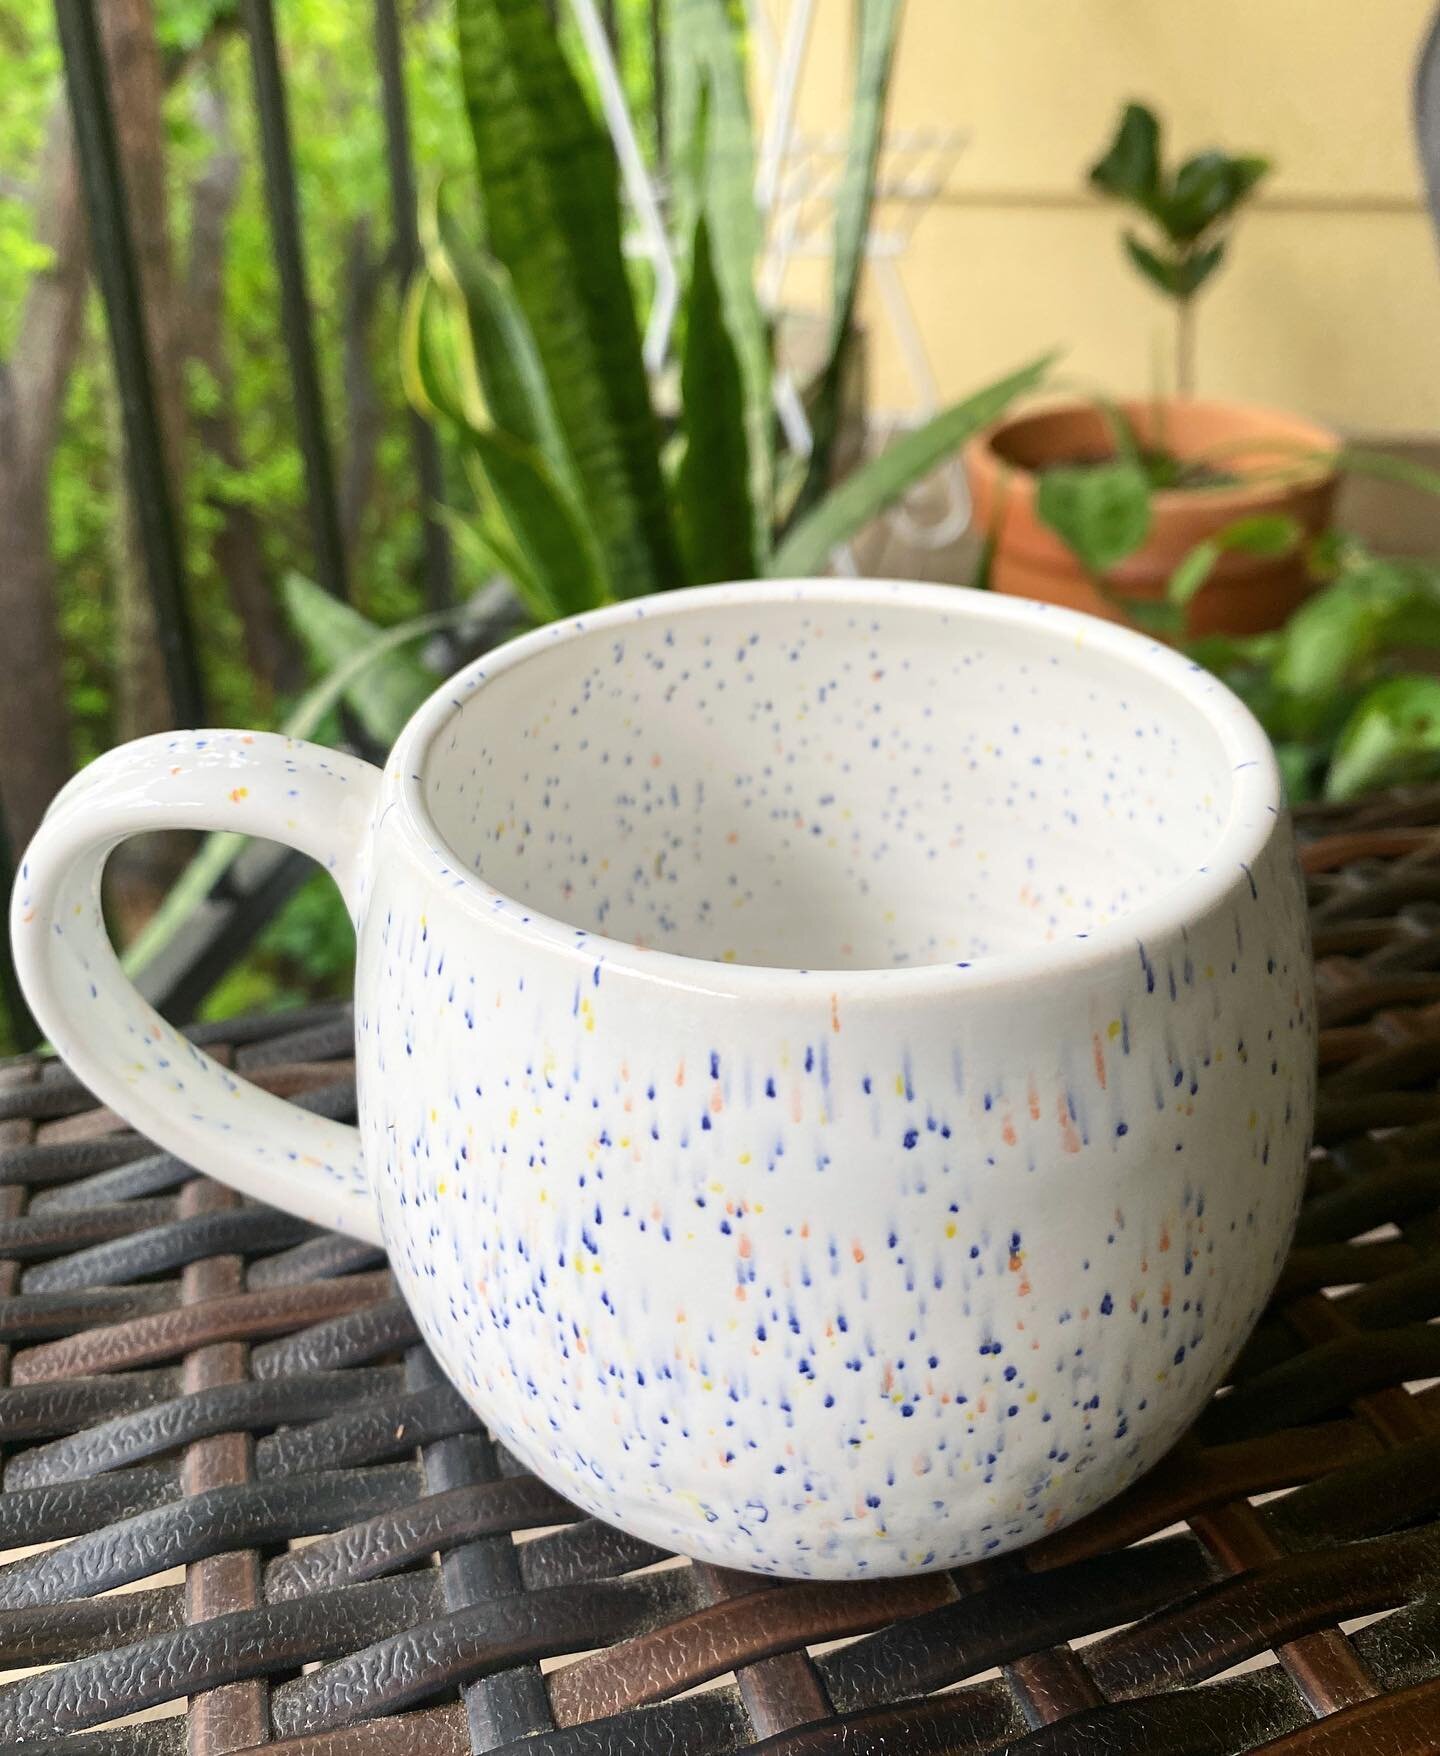 So excited with how great this speckled glaze turned out! Made this mug with a matching plate for a friend and looking forward to making more pieces like this 🌈✨
.
.
.
#mugs #mugshot #ceramics #pottery #makersgonnamake #rainbow #clay #rainbowmug #sp